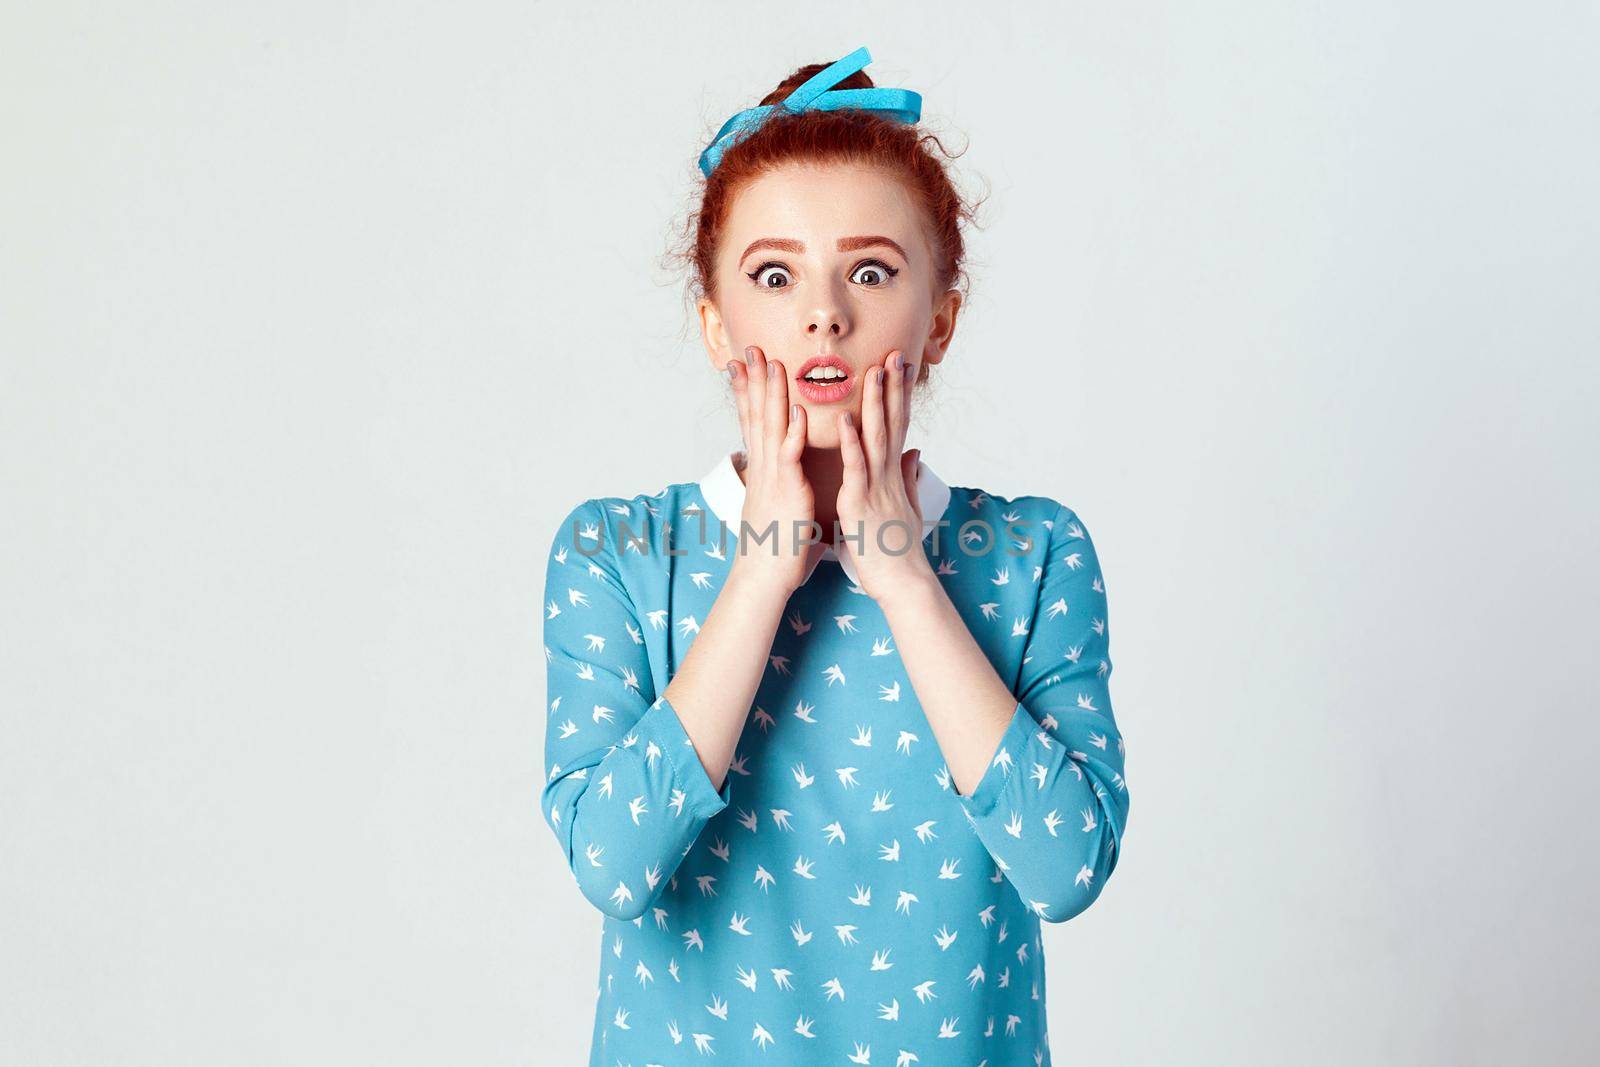 Human face expressions and emotions. Redhead young girl touching her cheeks and looking at camera with shocked face. Isolated studio shot on gray background.